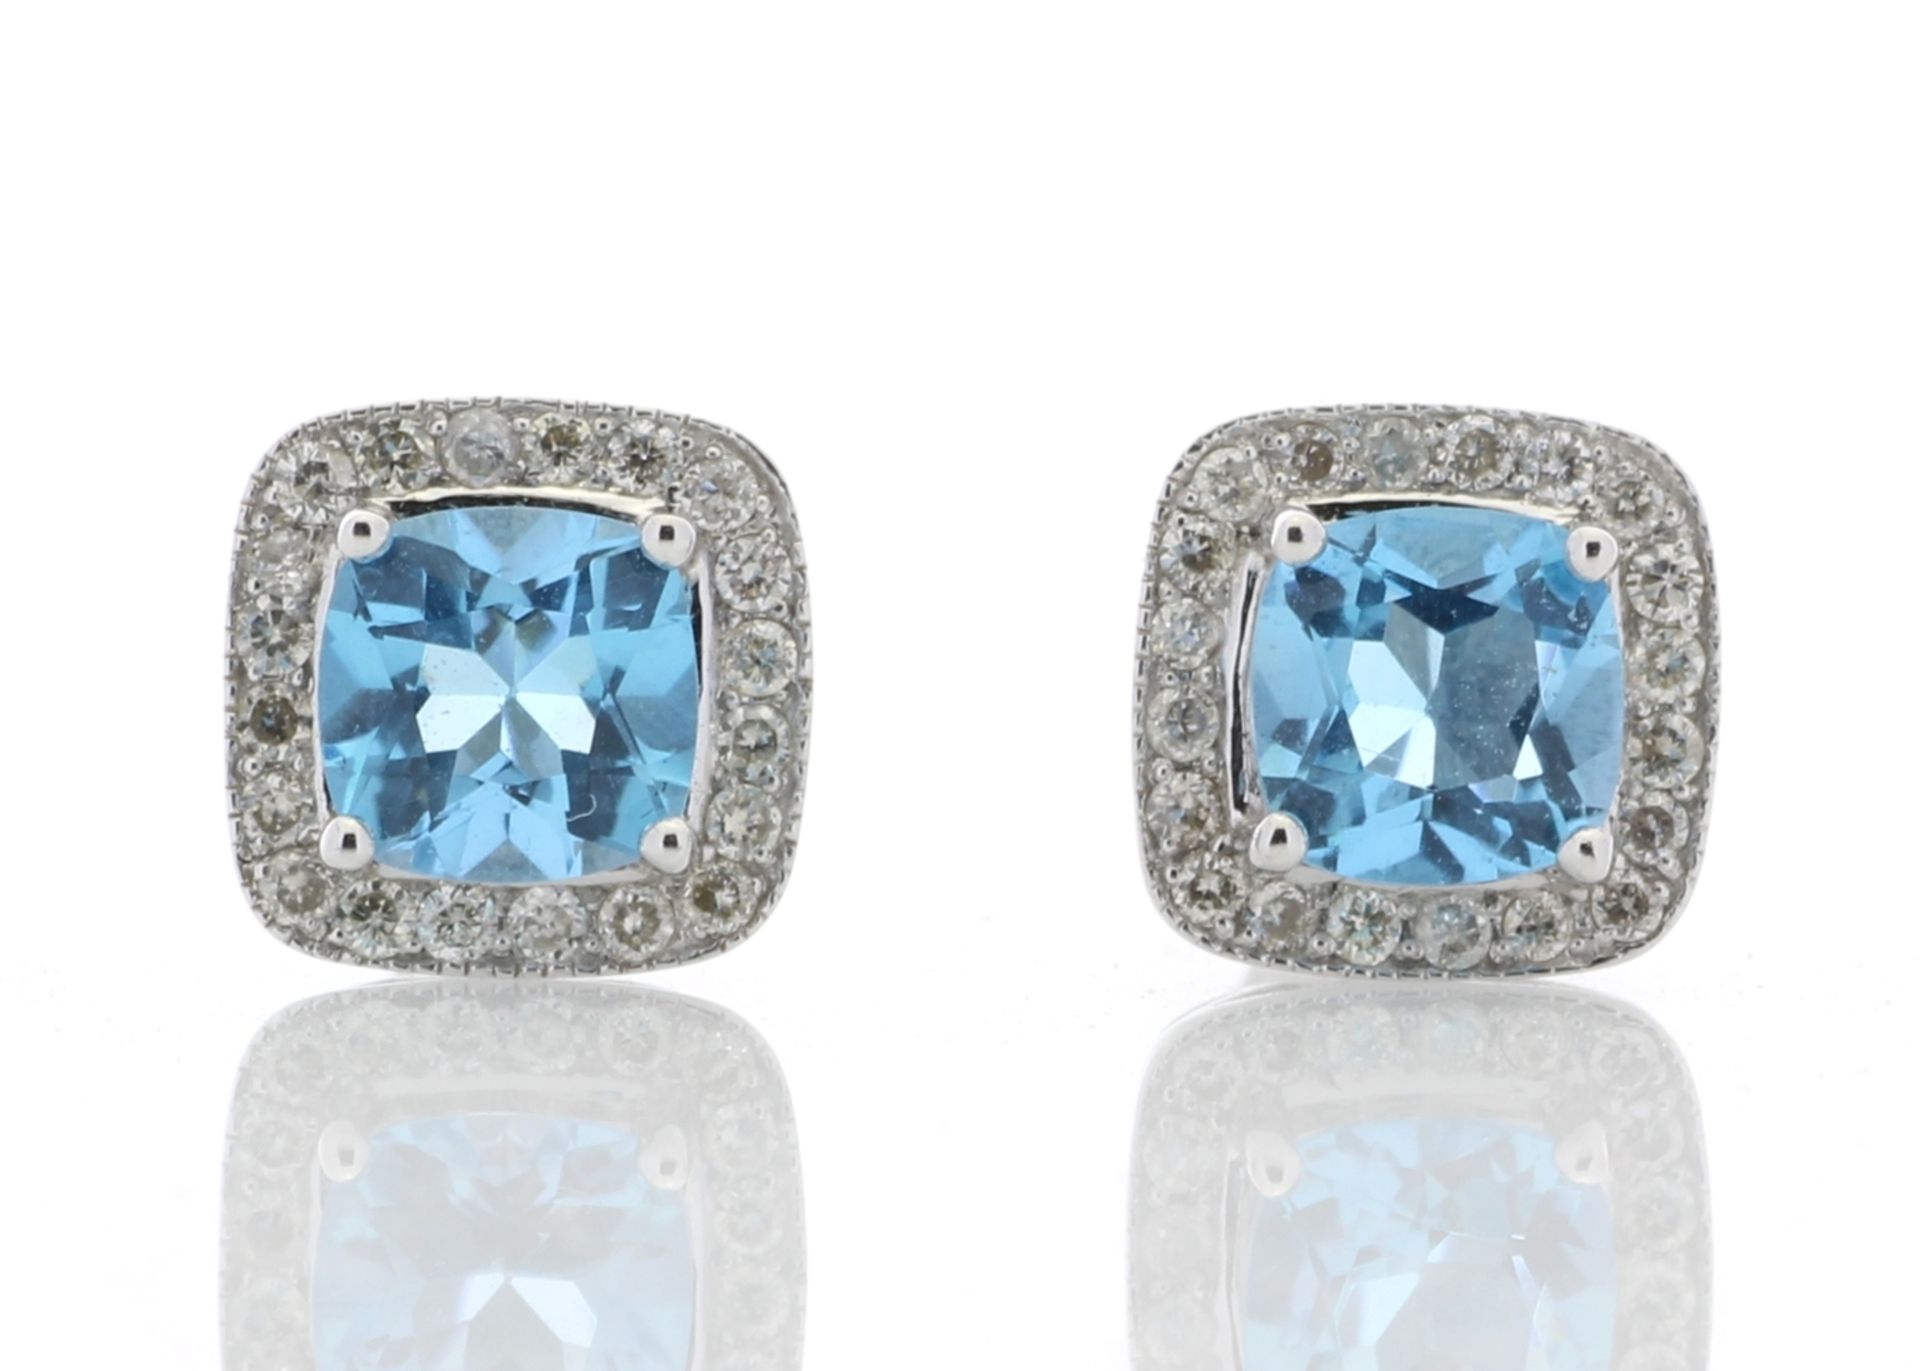 Blue topaz and diamond stud earrings. Cushion cut topaz surrounded by small brilliant cut